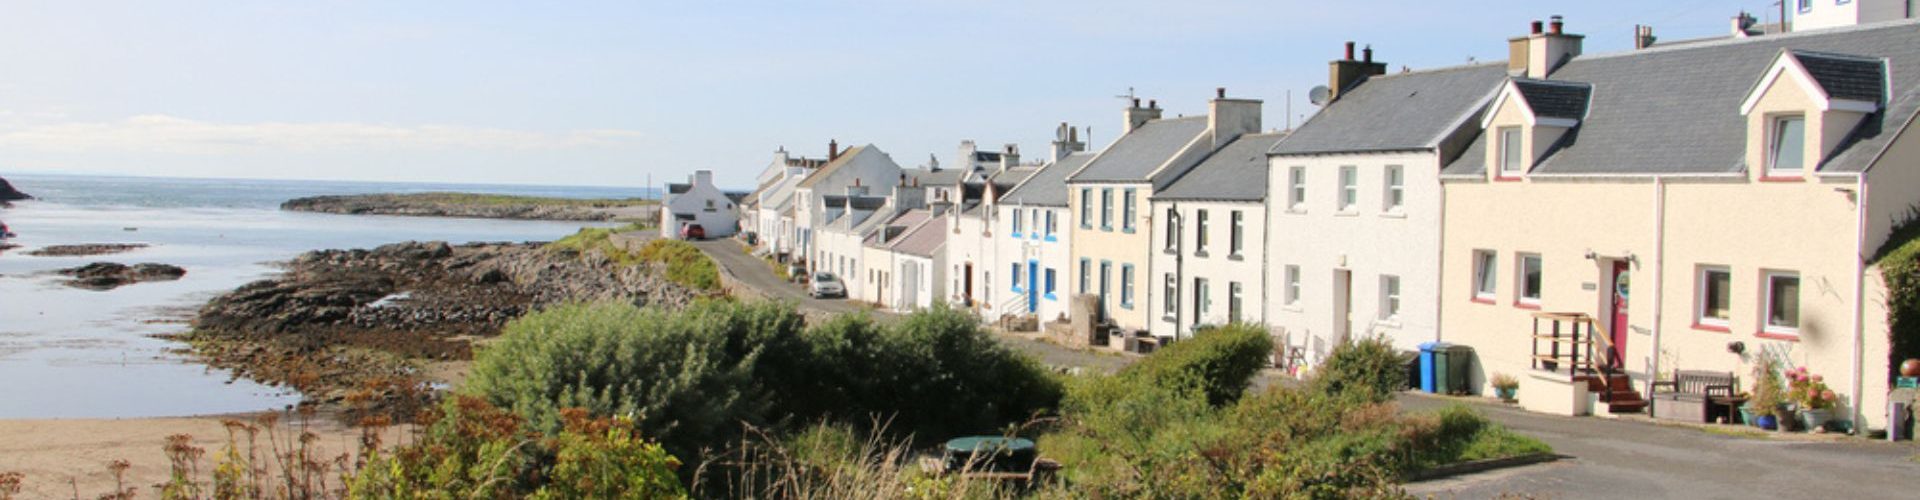 Houses on the cost of Islay on a cold winters day